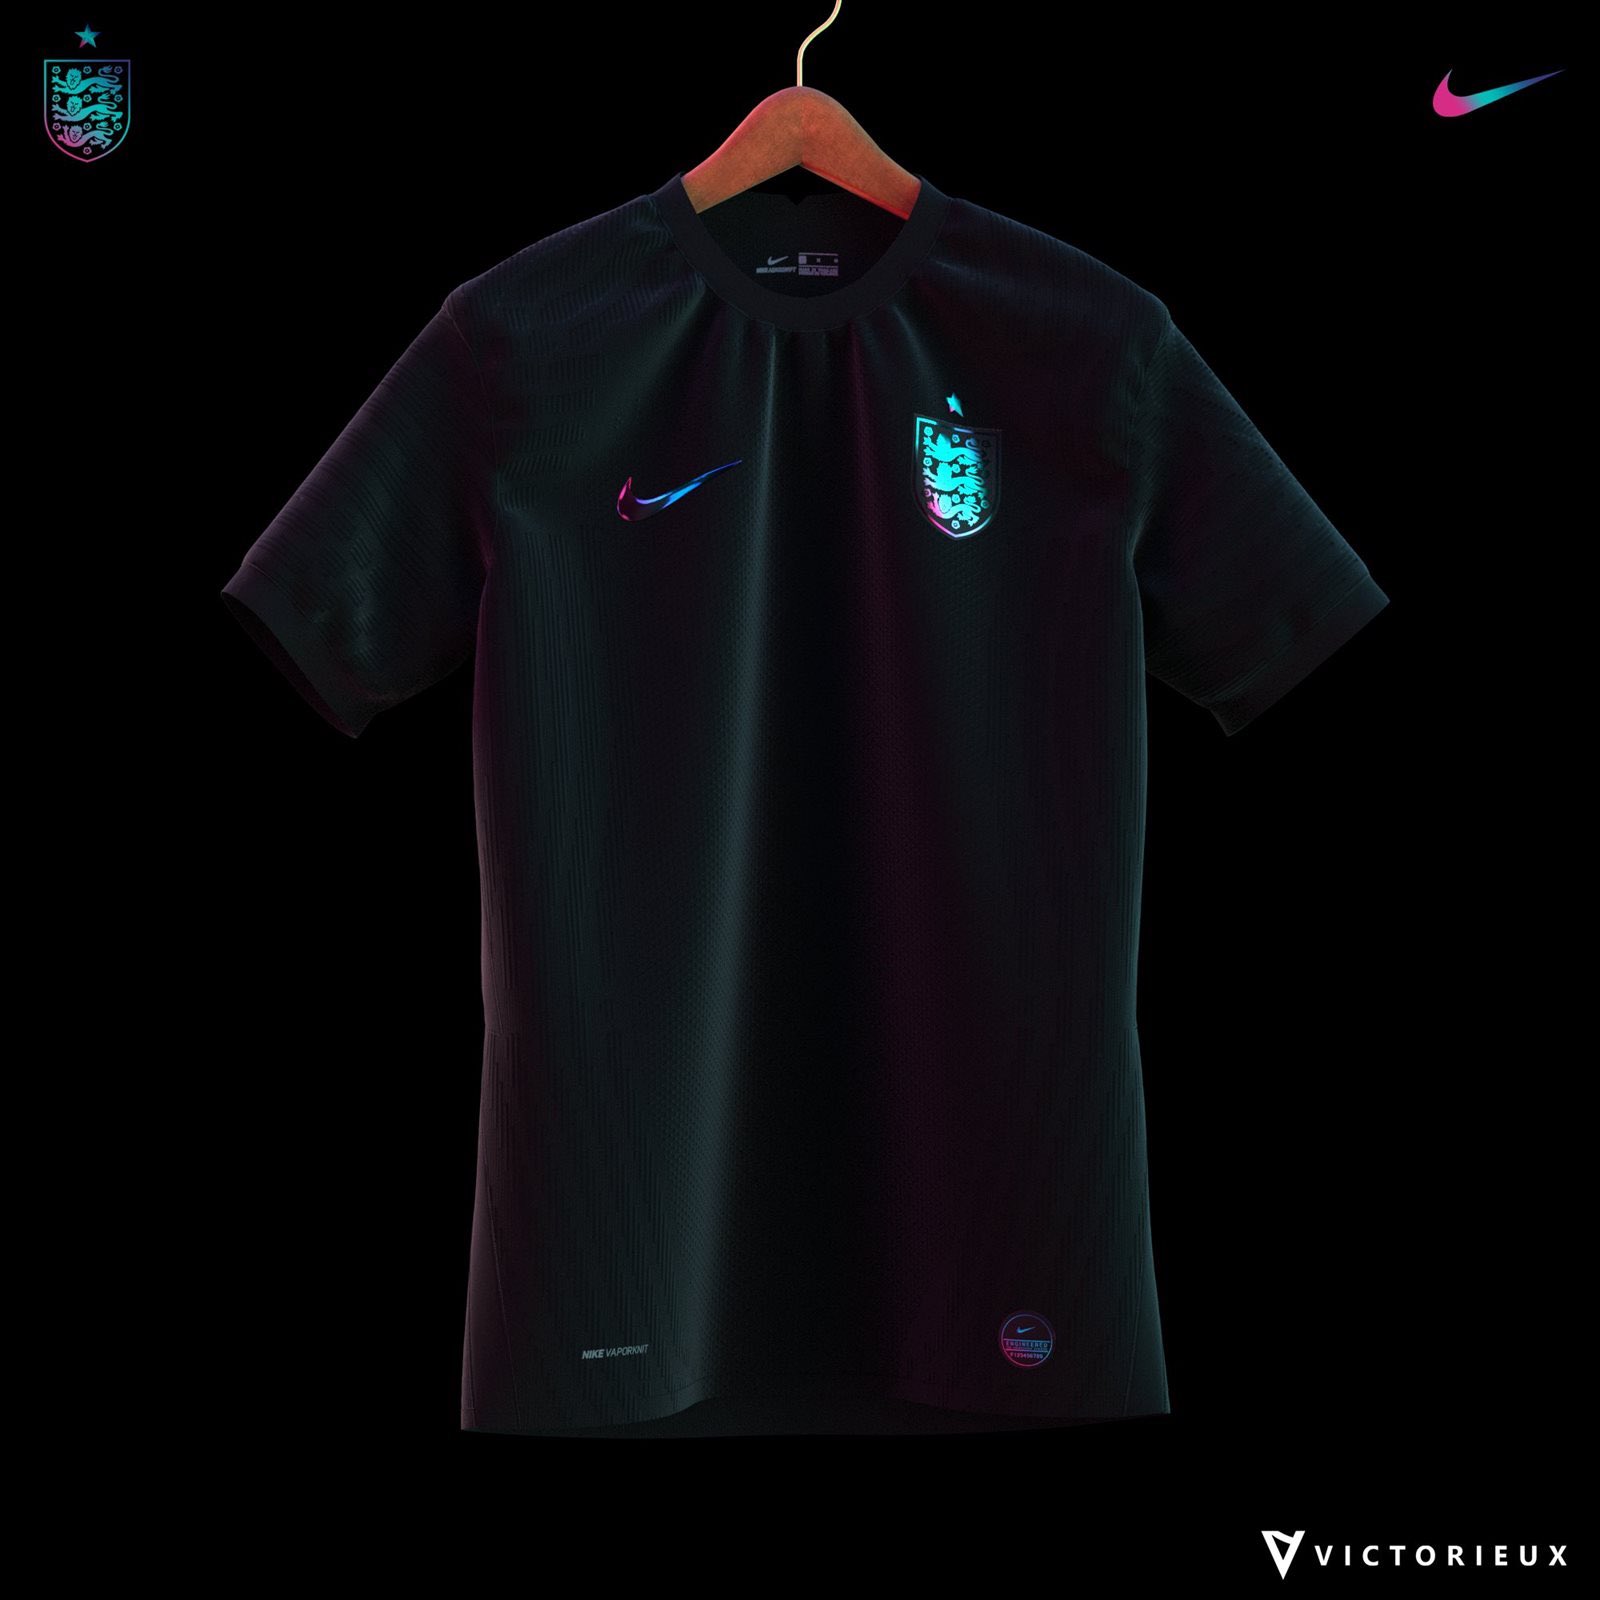 England Football Fans On Twitter The Rumoured New England Concept Third Kit Made By Nike For 2021 Is Bloody Gorgeous